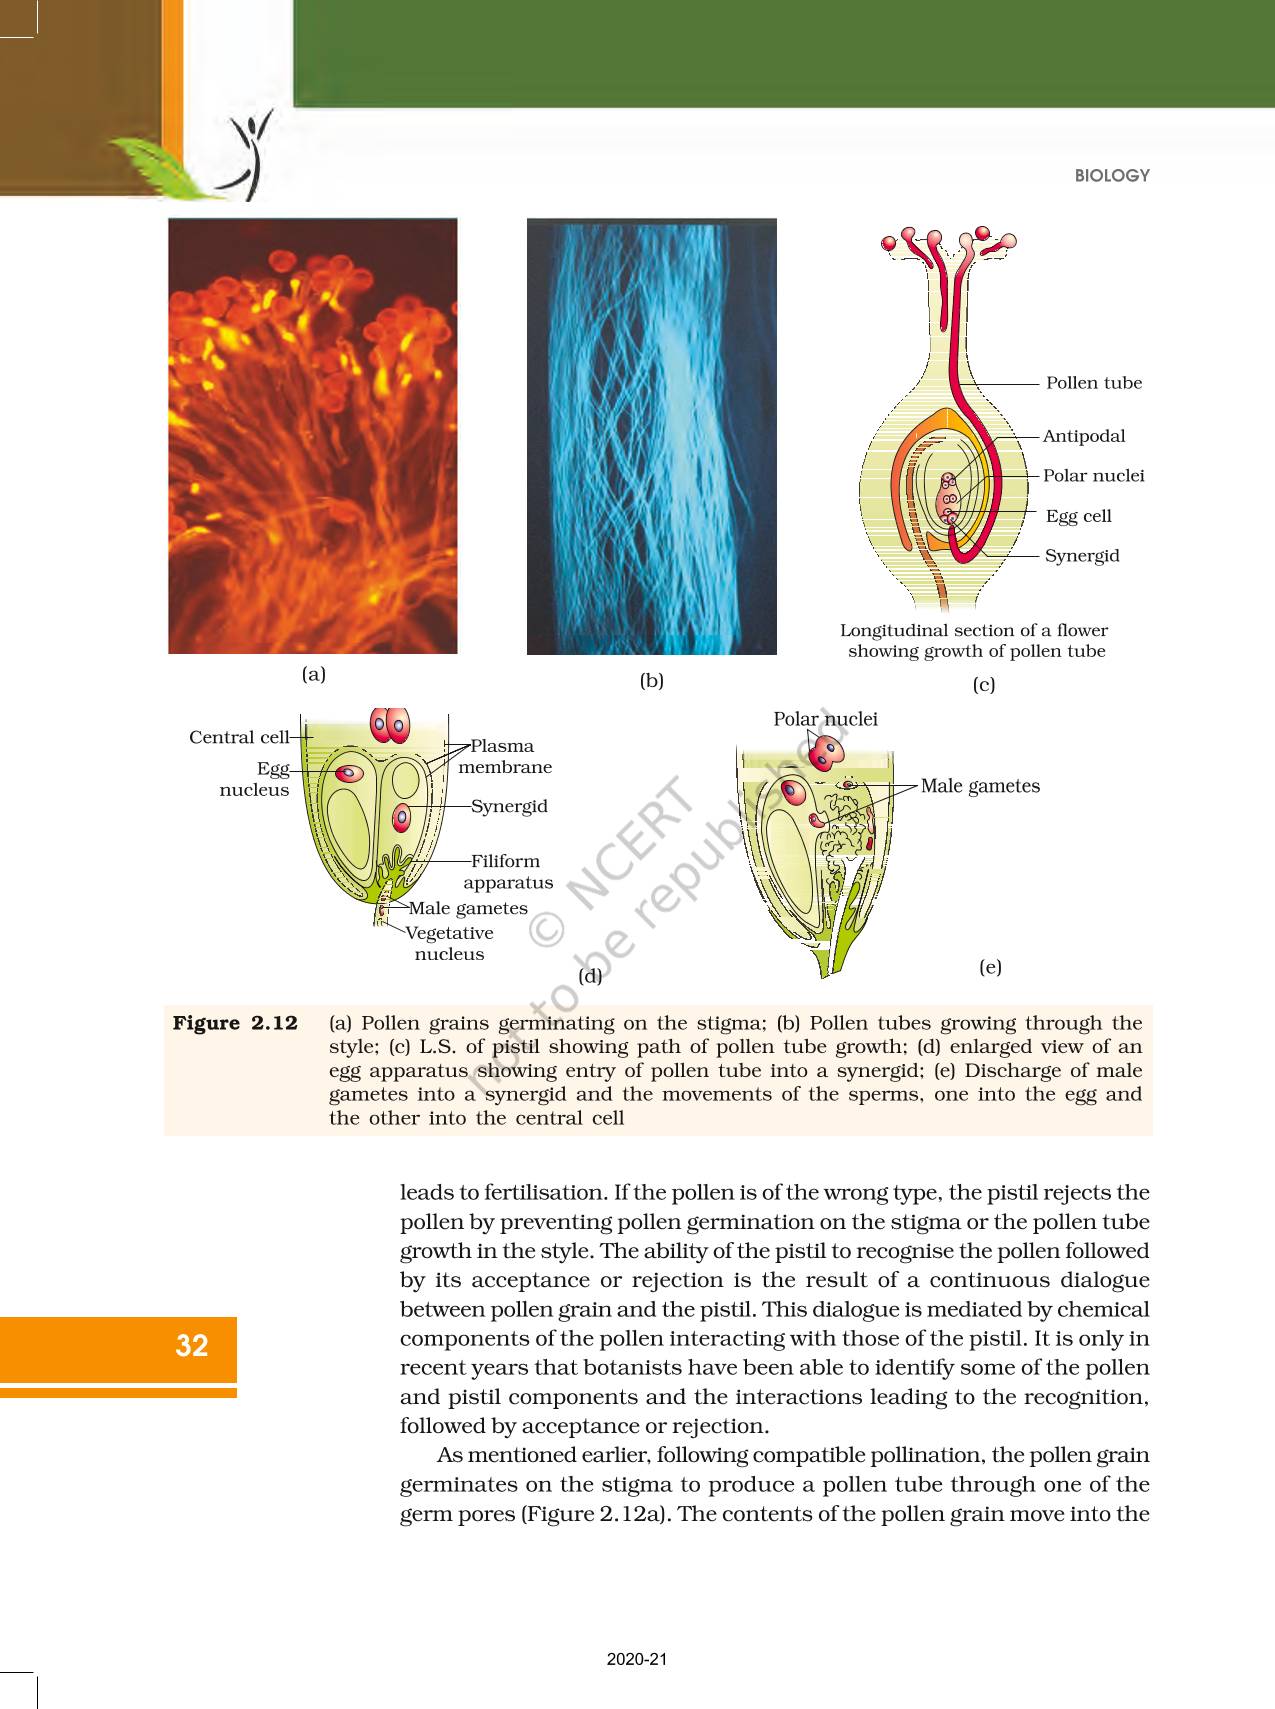 Sexual Reproduction In Flowering Plants Ncert Book Of Class 12 Biology 5387